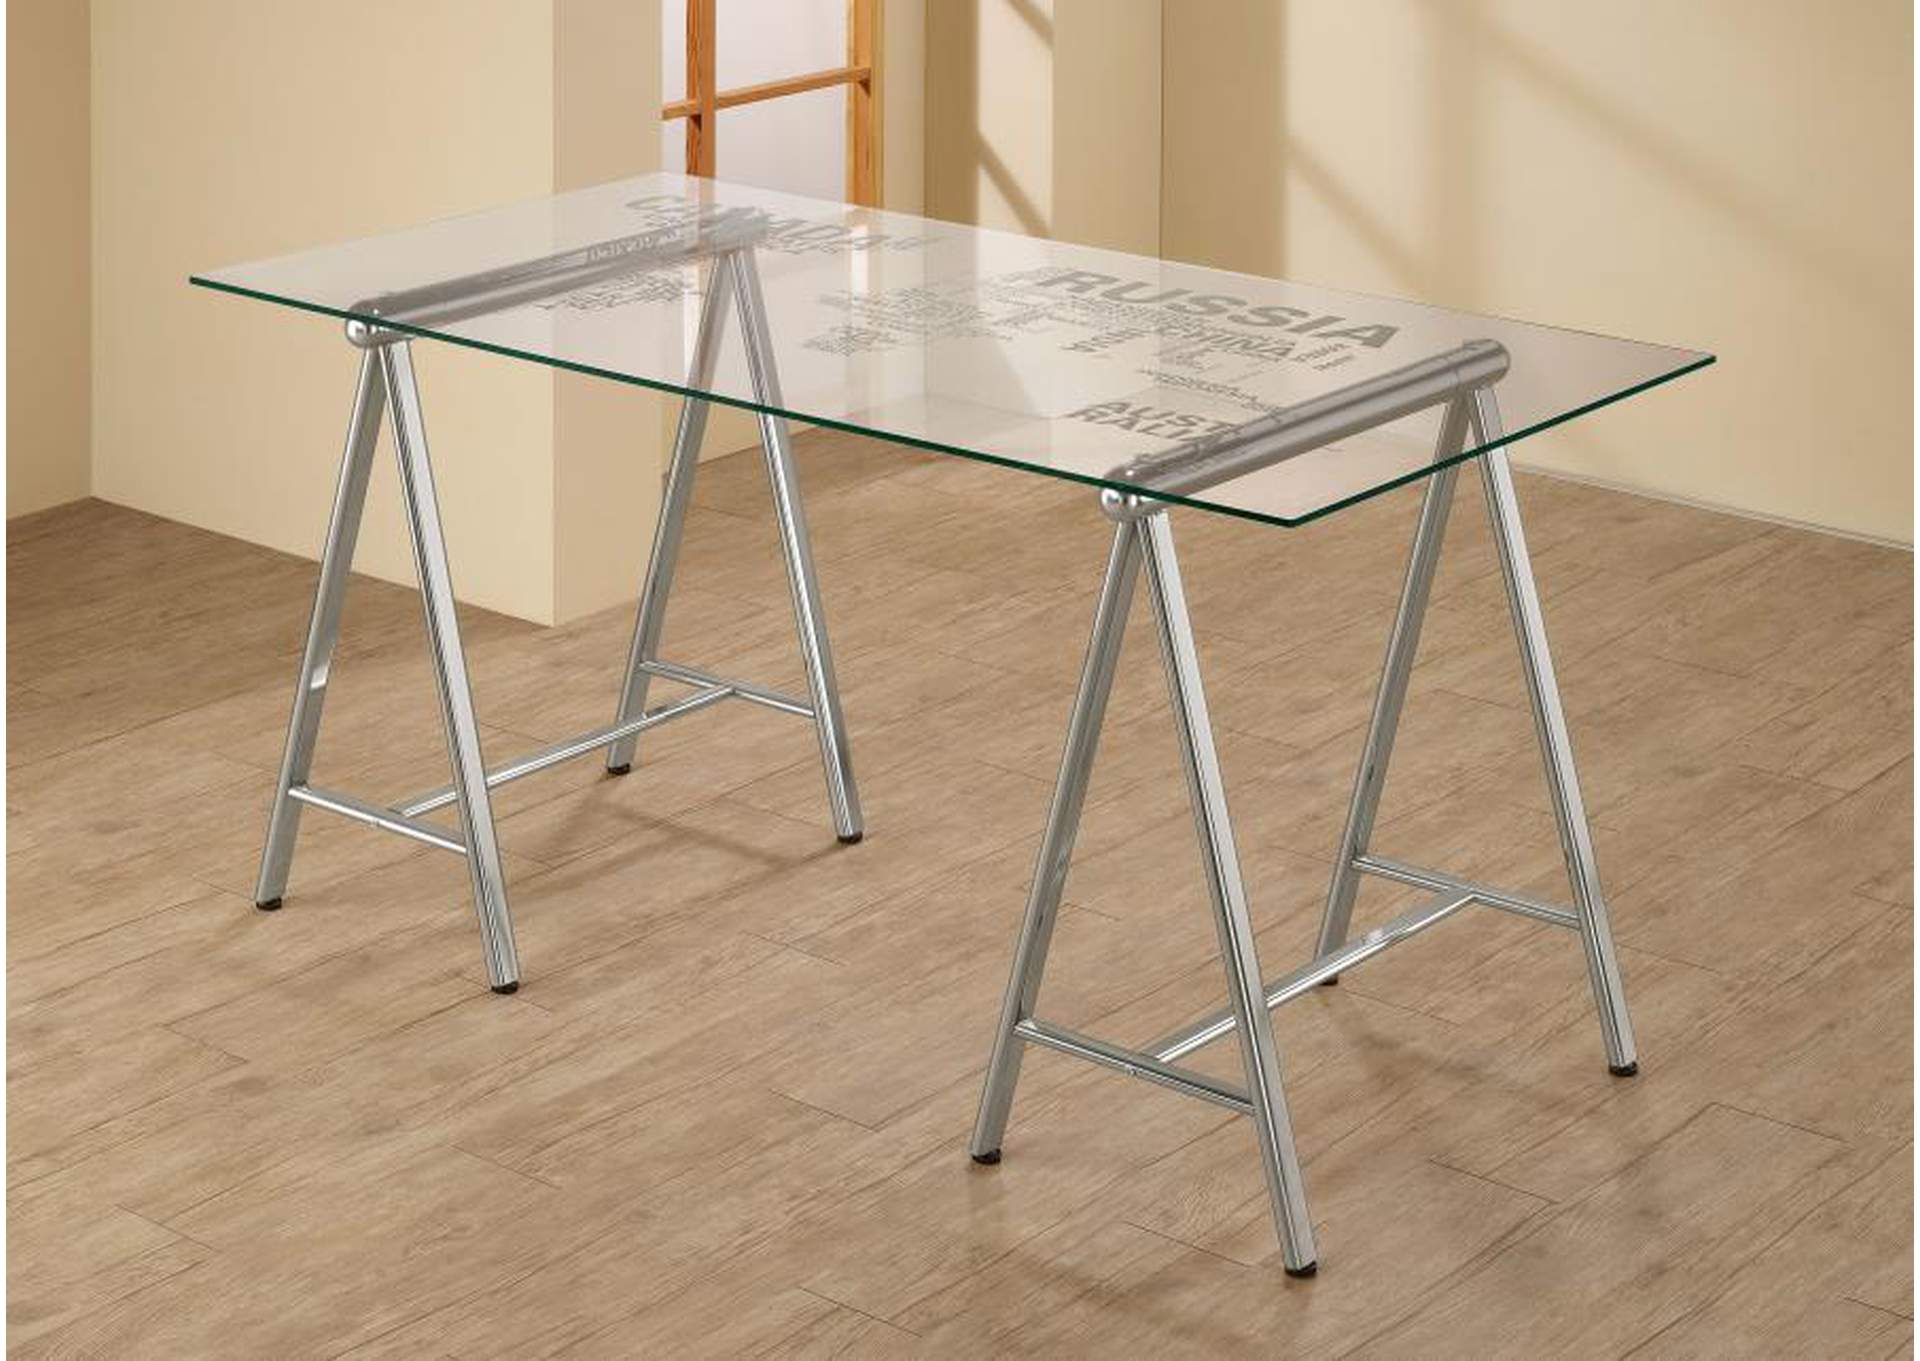 Patton World Map Writing Desk Nickel And Printed Clear,Coaster Furniture